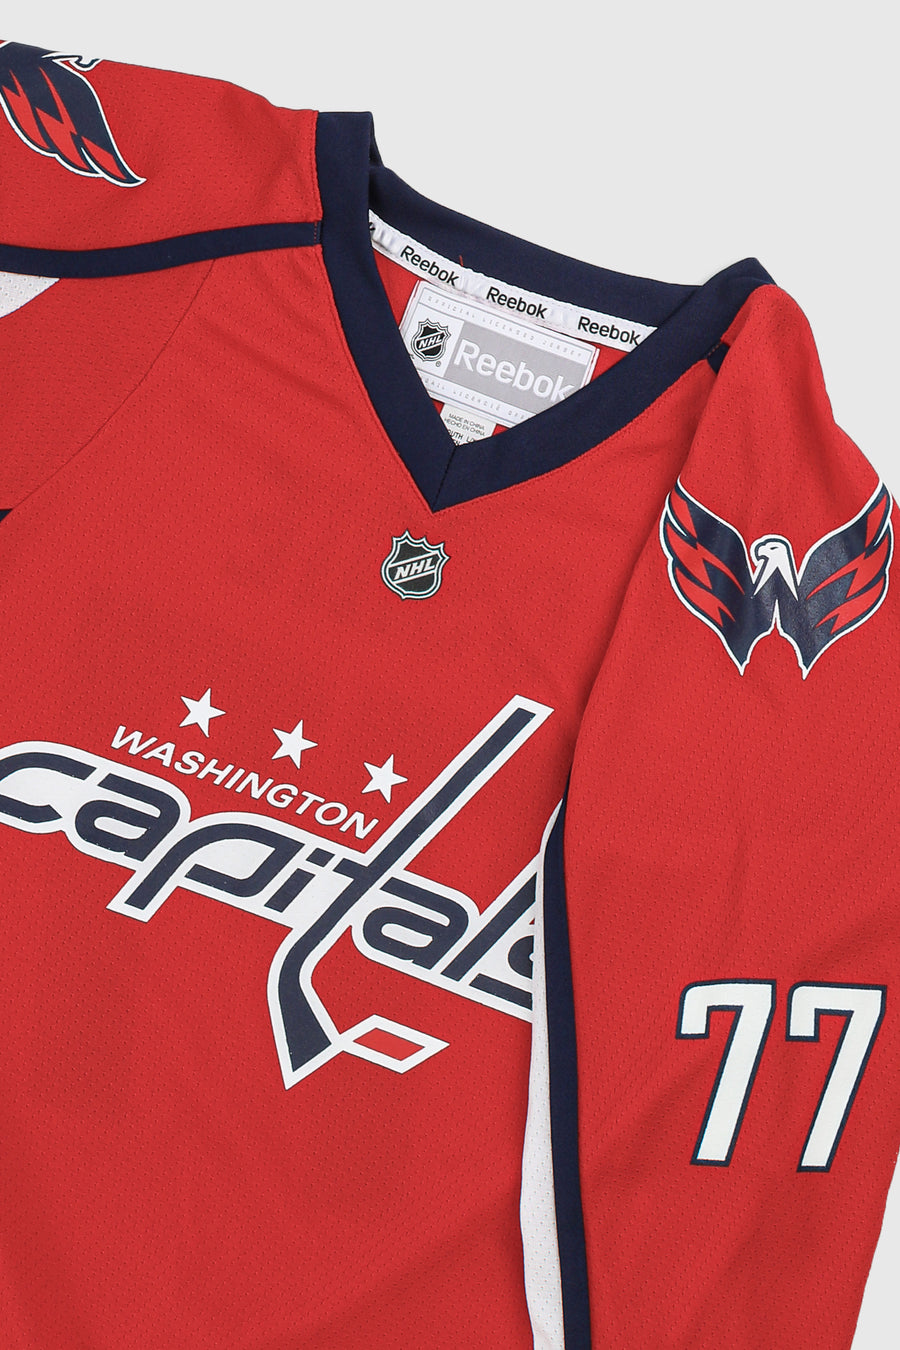 Vintage Capitals NHL Jersey - S